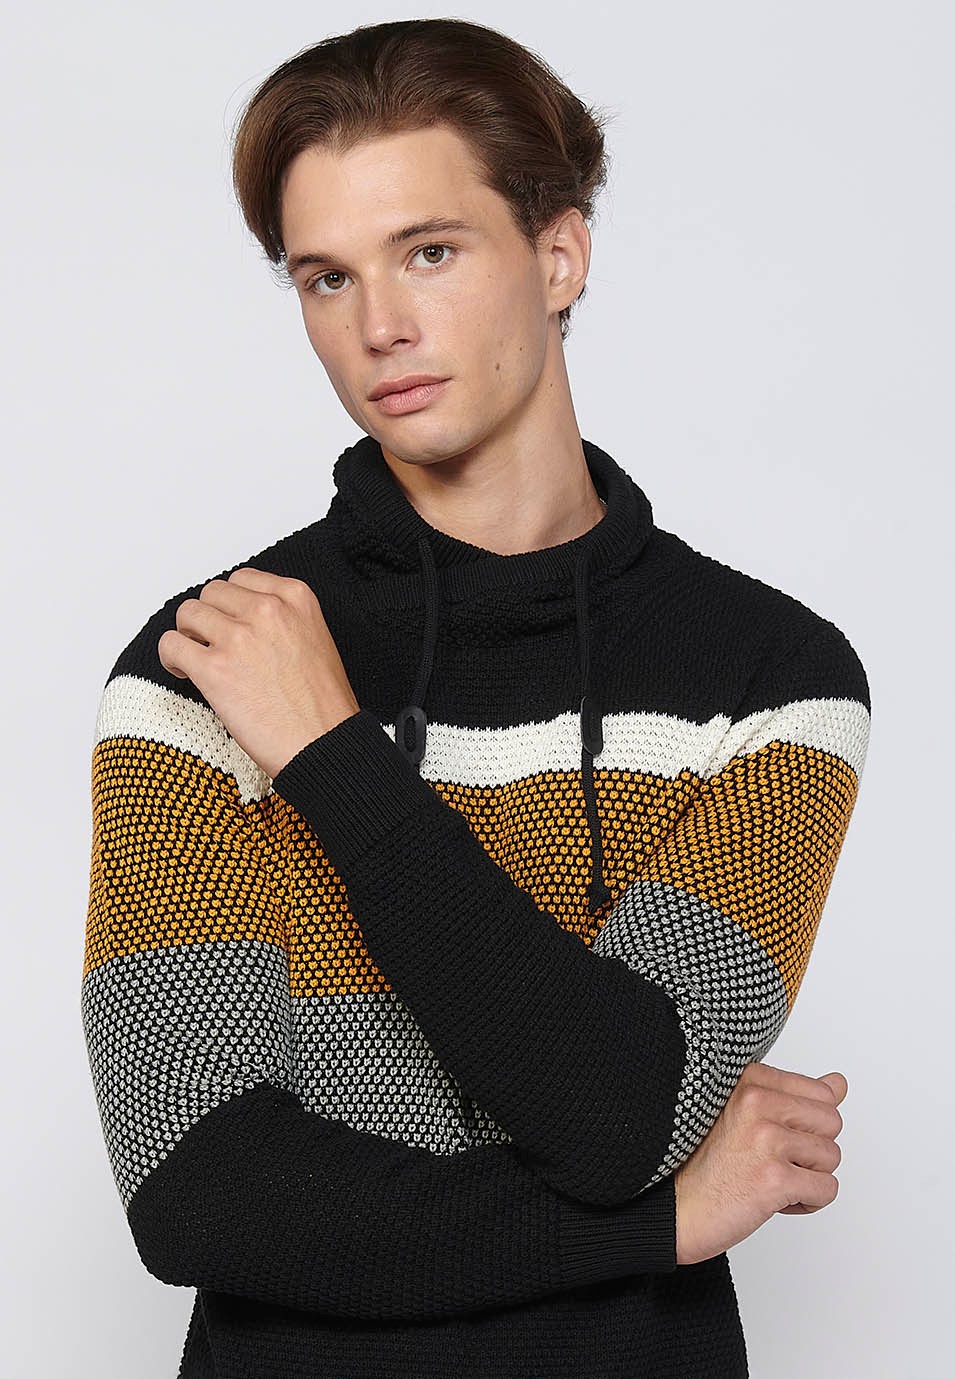 Men's Black Cotton Textured Striped Tricot Long Sleeve Pullover with Adjustable Drawstring Turtleneck